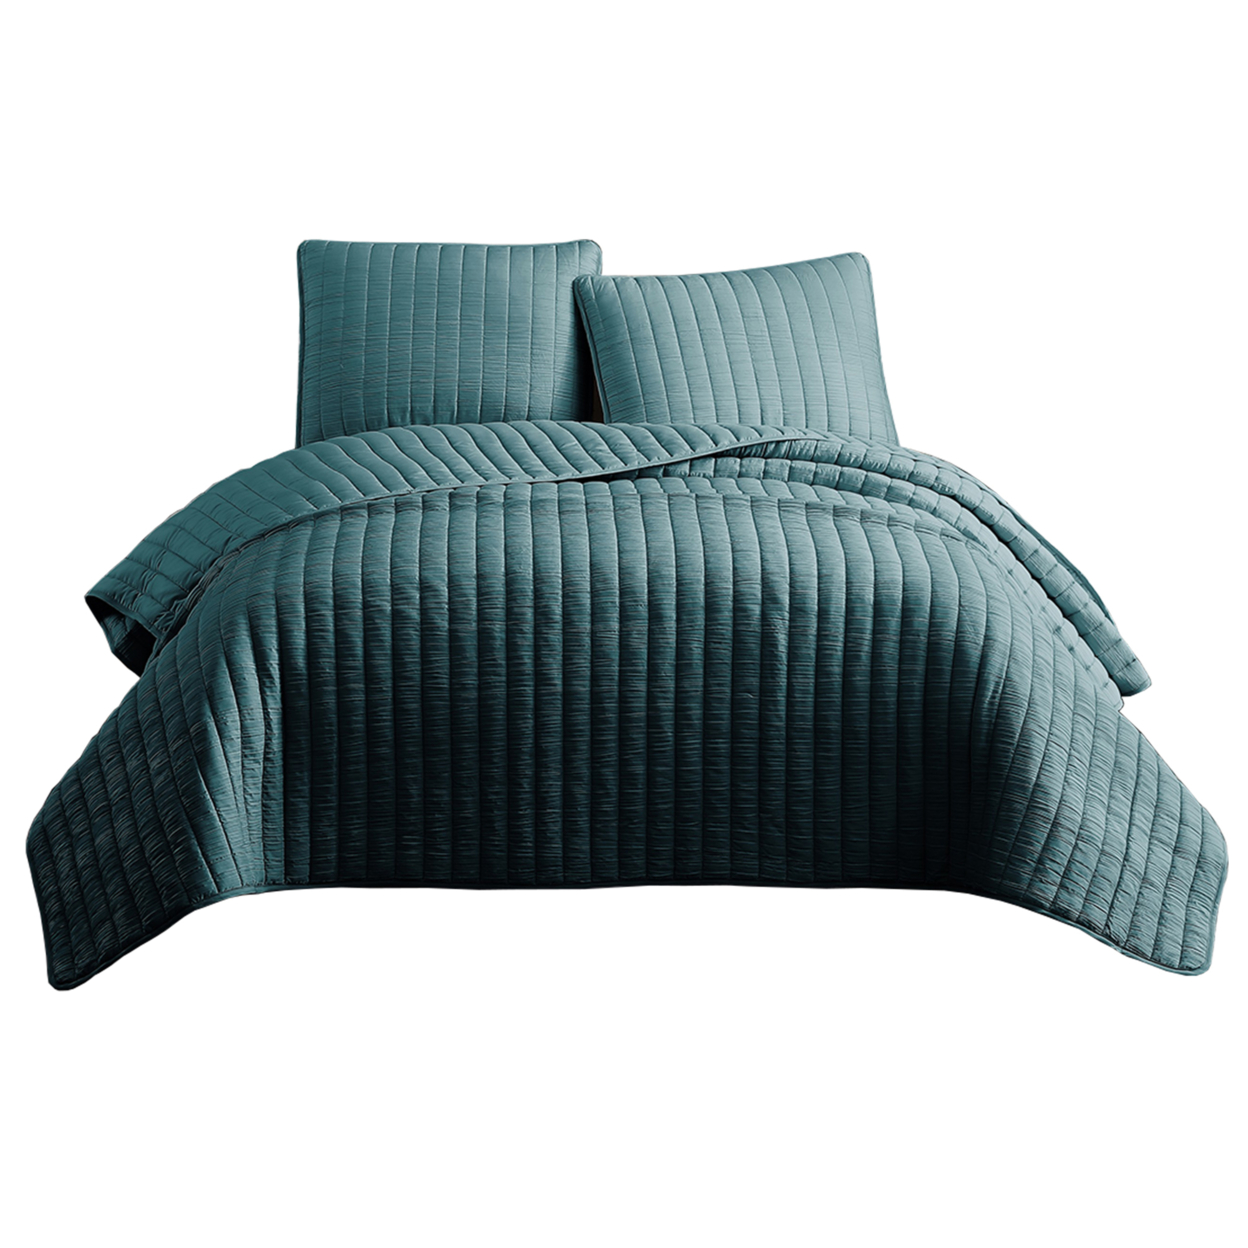 3 Piece Crinkle Queen Coverlet Set With Vertical Stitching, Turquoise Blue- Saltoro Sherpi